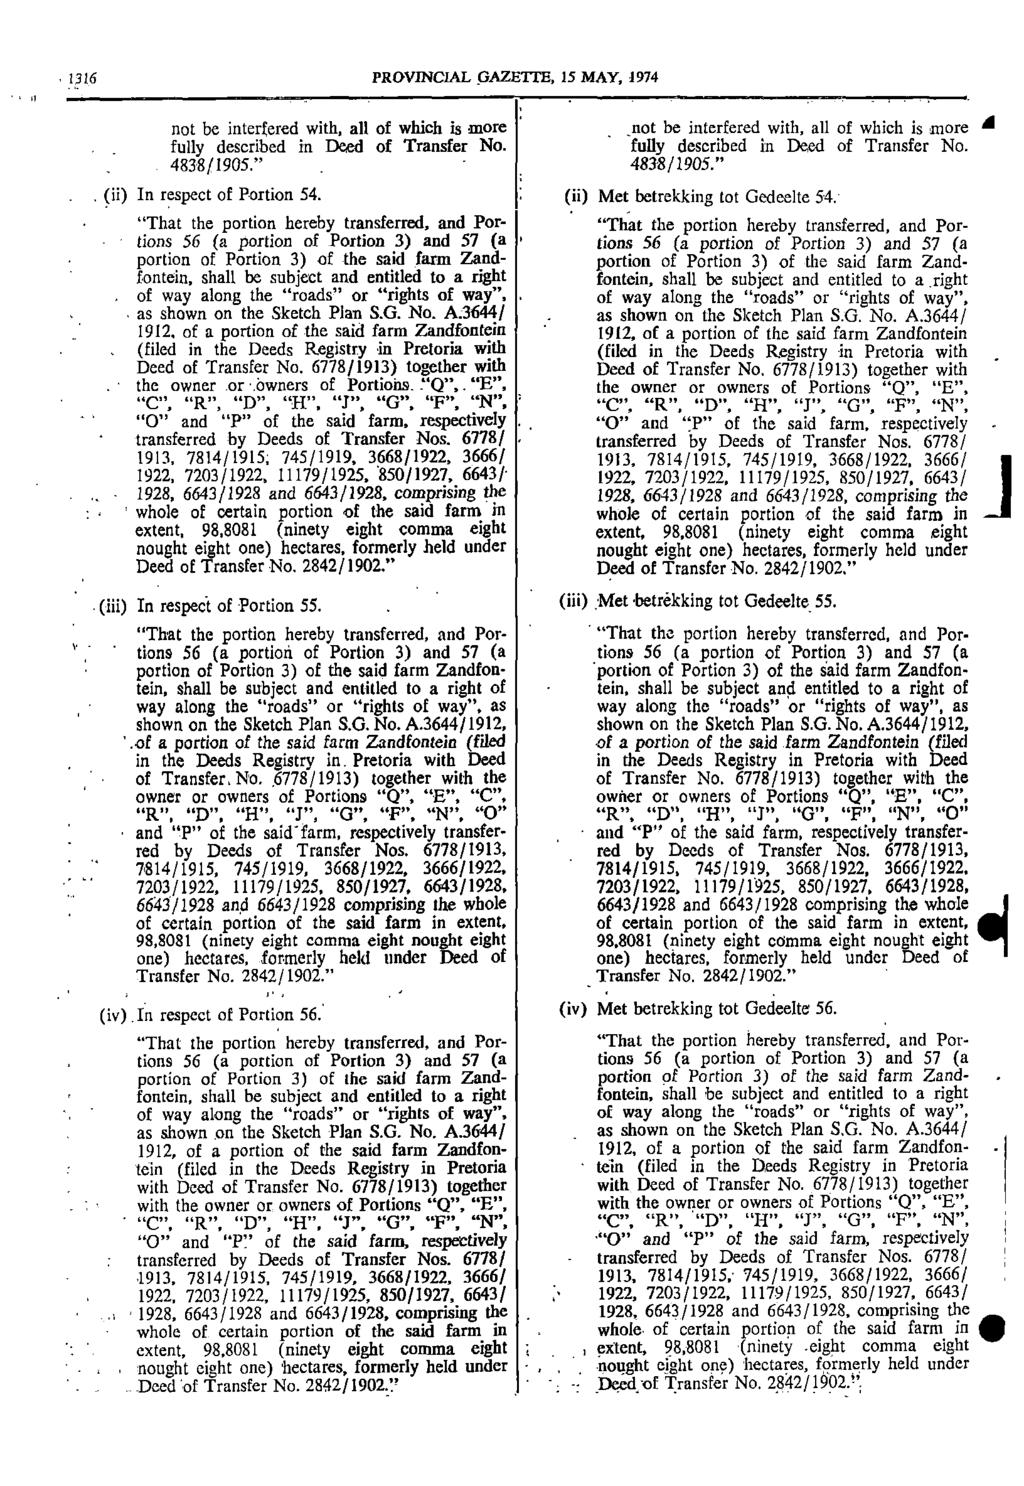 36 PROVINCIAL GAZETTE 5 MAY 974 not be interfered with all of which is more not be interfered with all of which is more A fully described in Deed of Transfer No fully described in Deed of Transfer No